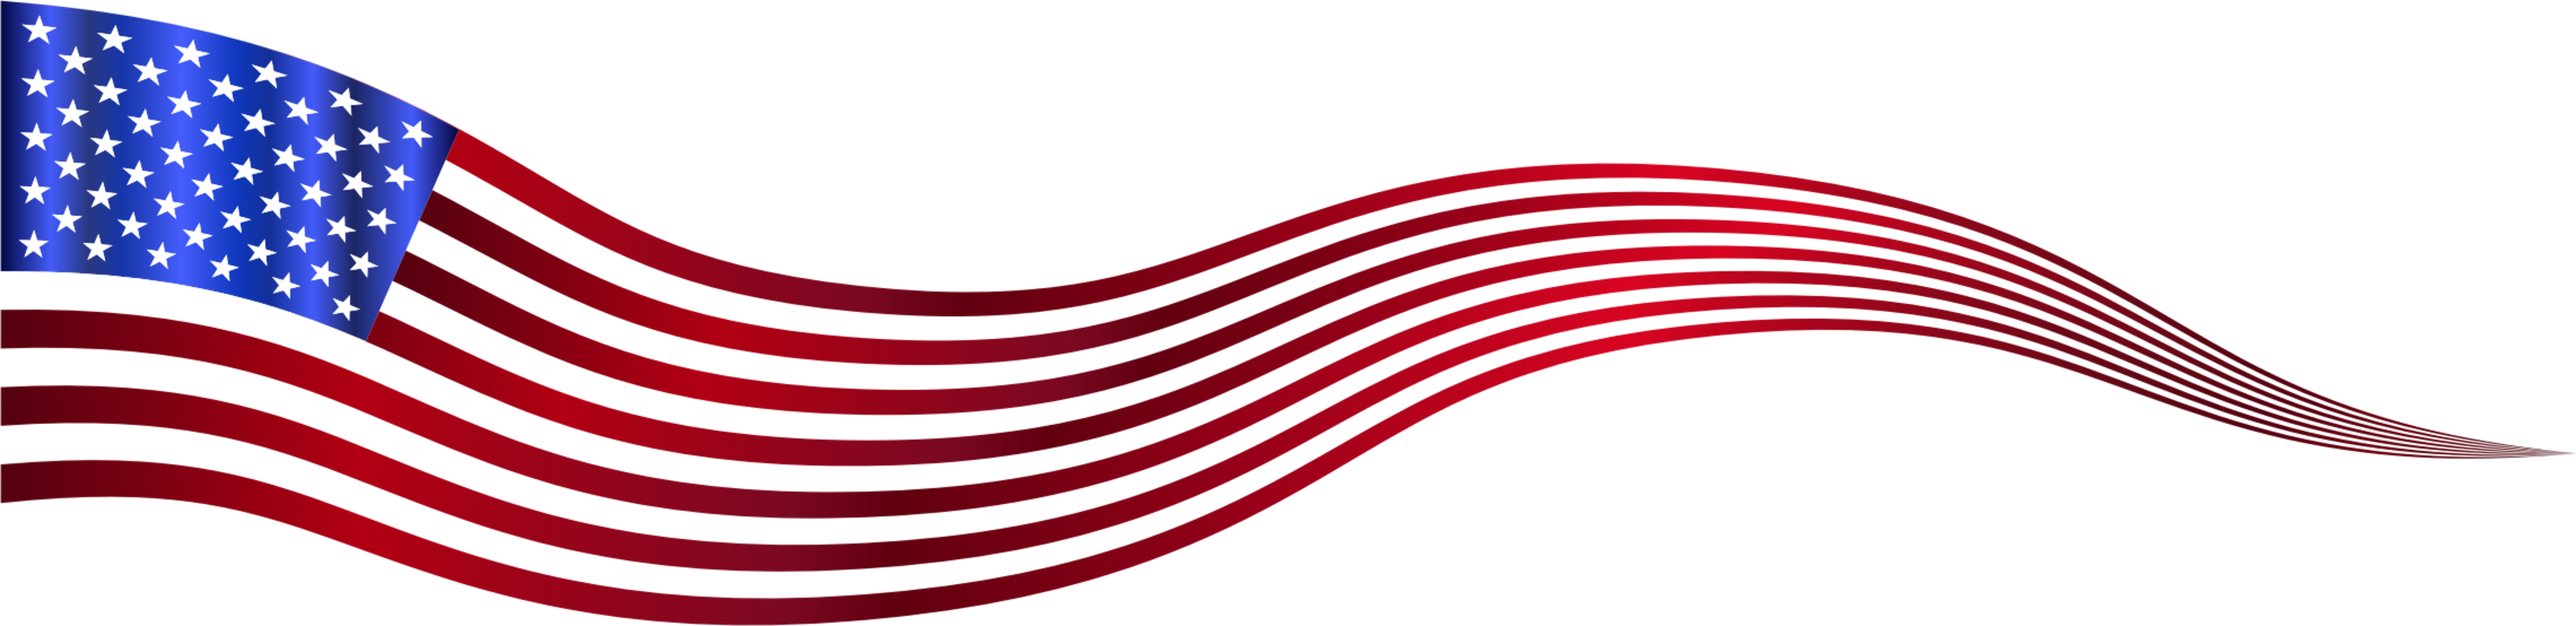 Line,Red,United States